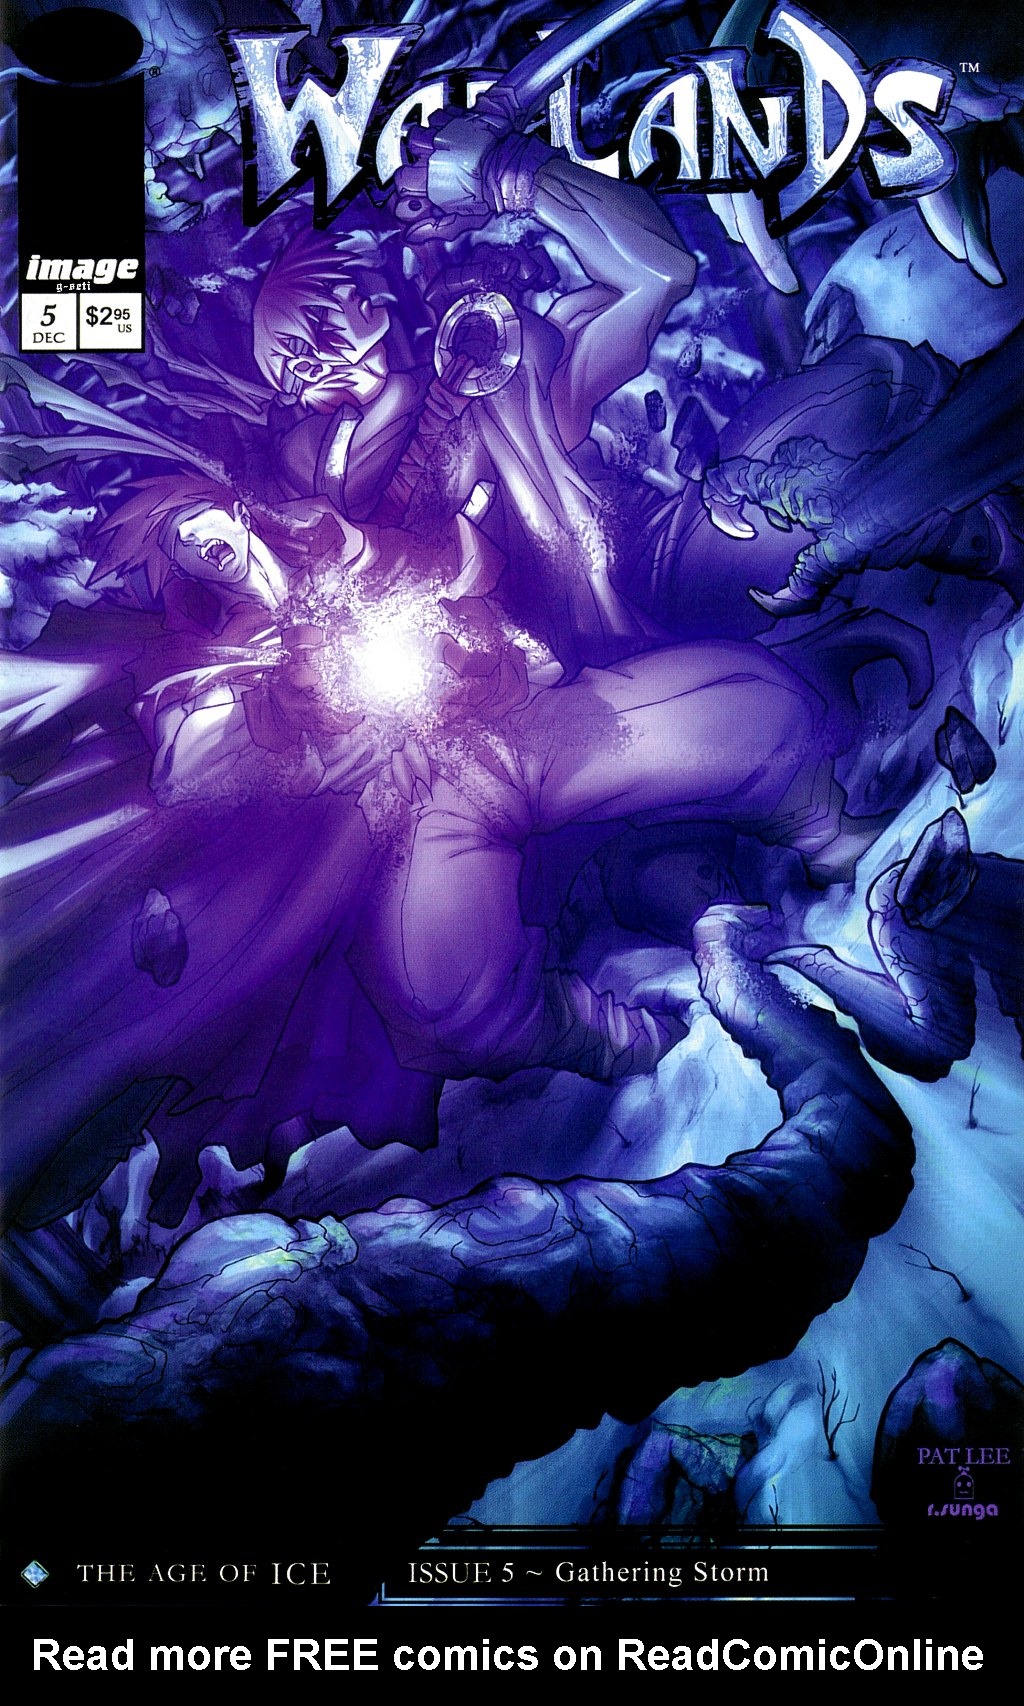 Read online Warlands: The Age of Ice comic -  Issue #5 - 1